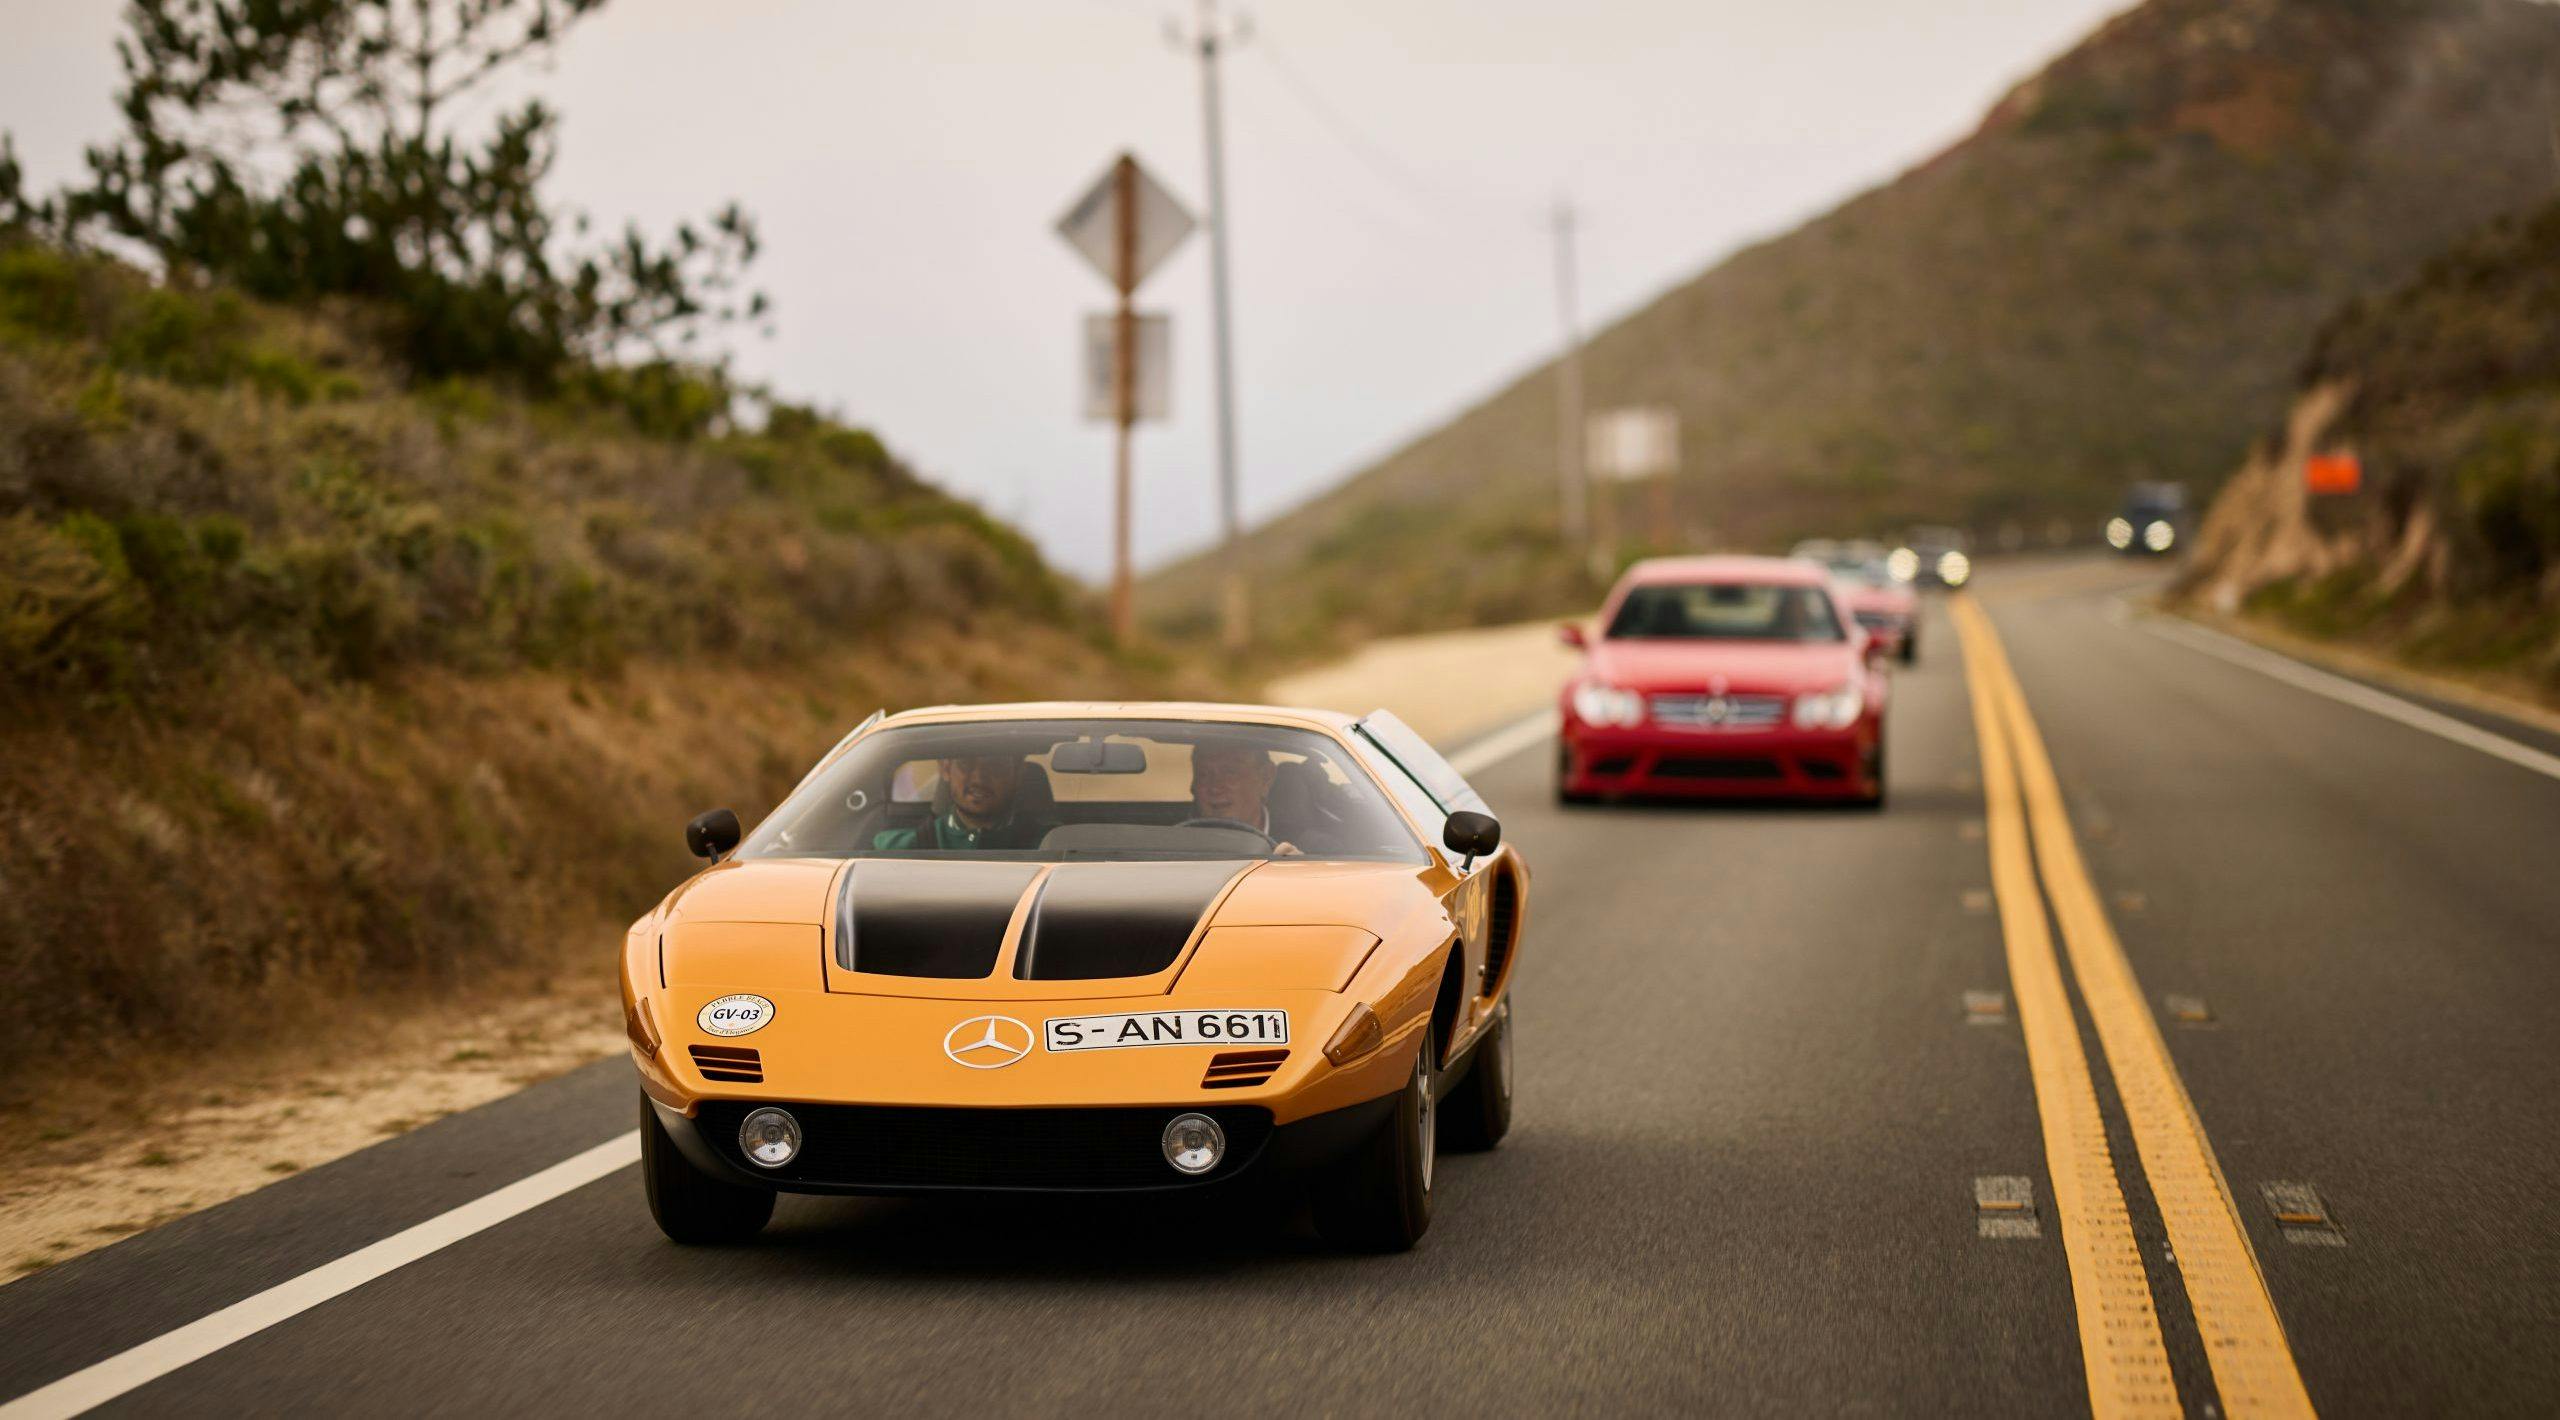 Riding in a 1970 Mercedes-Benz C111 is the ultimate historical 